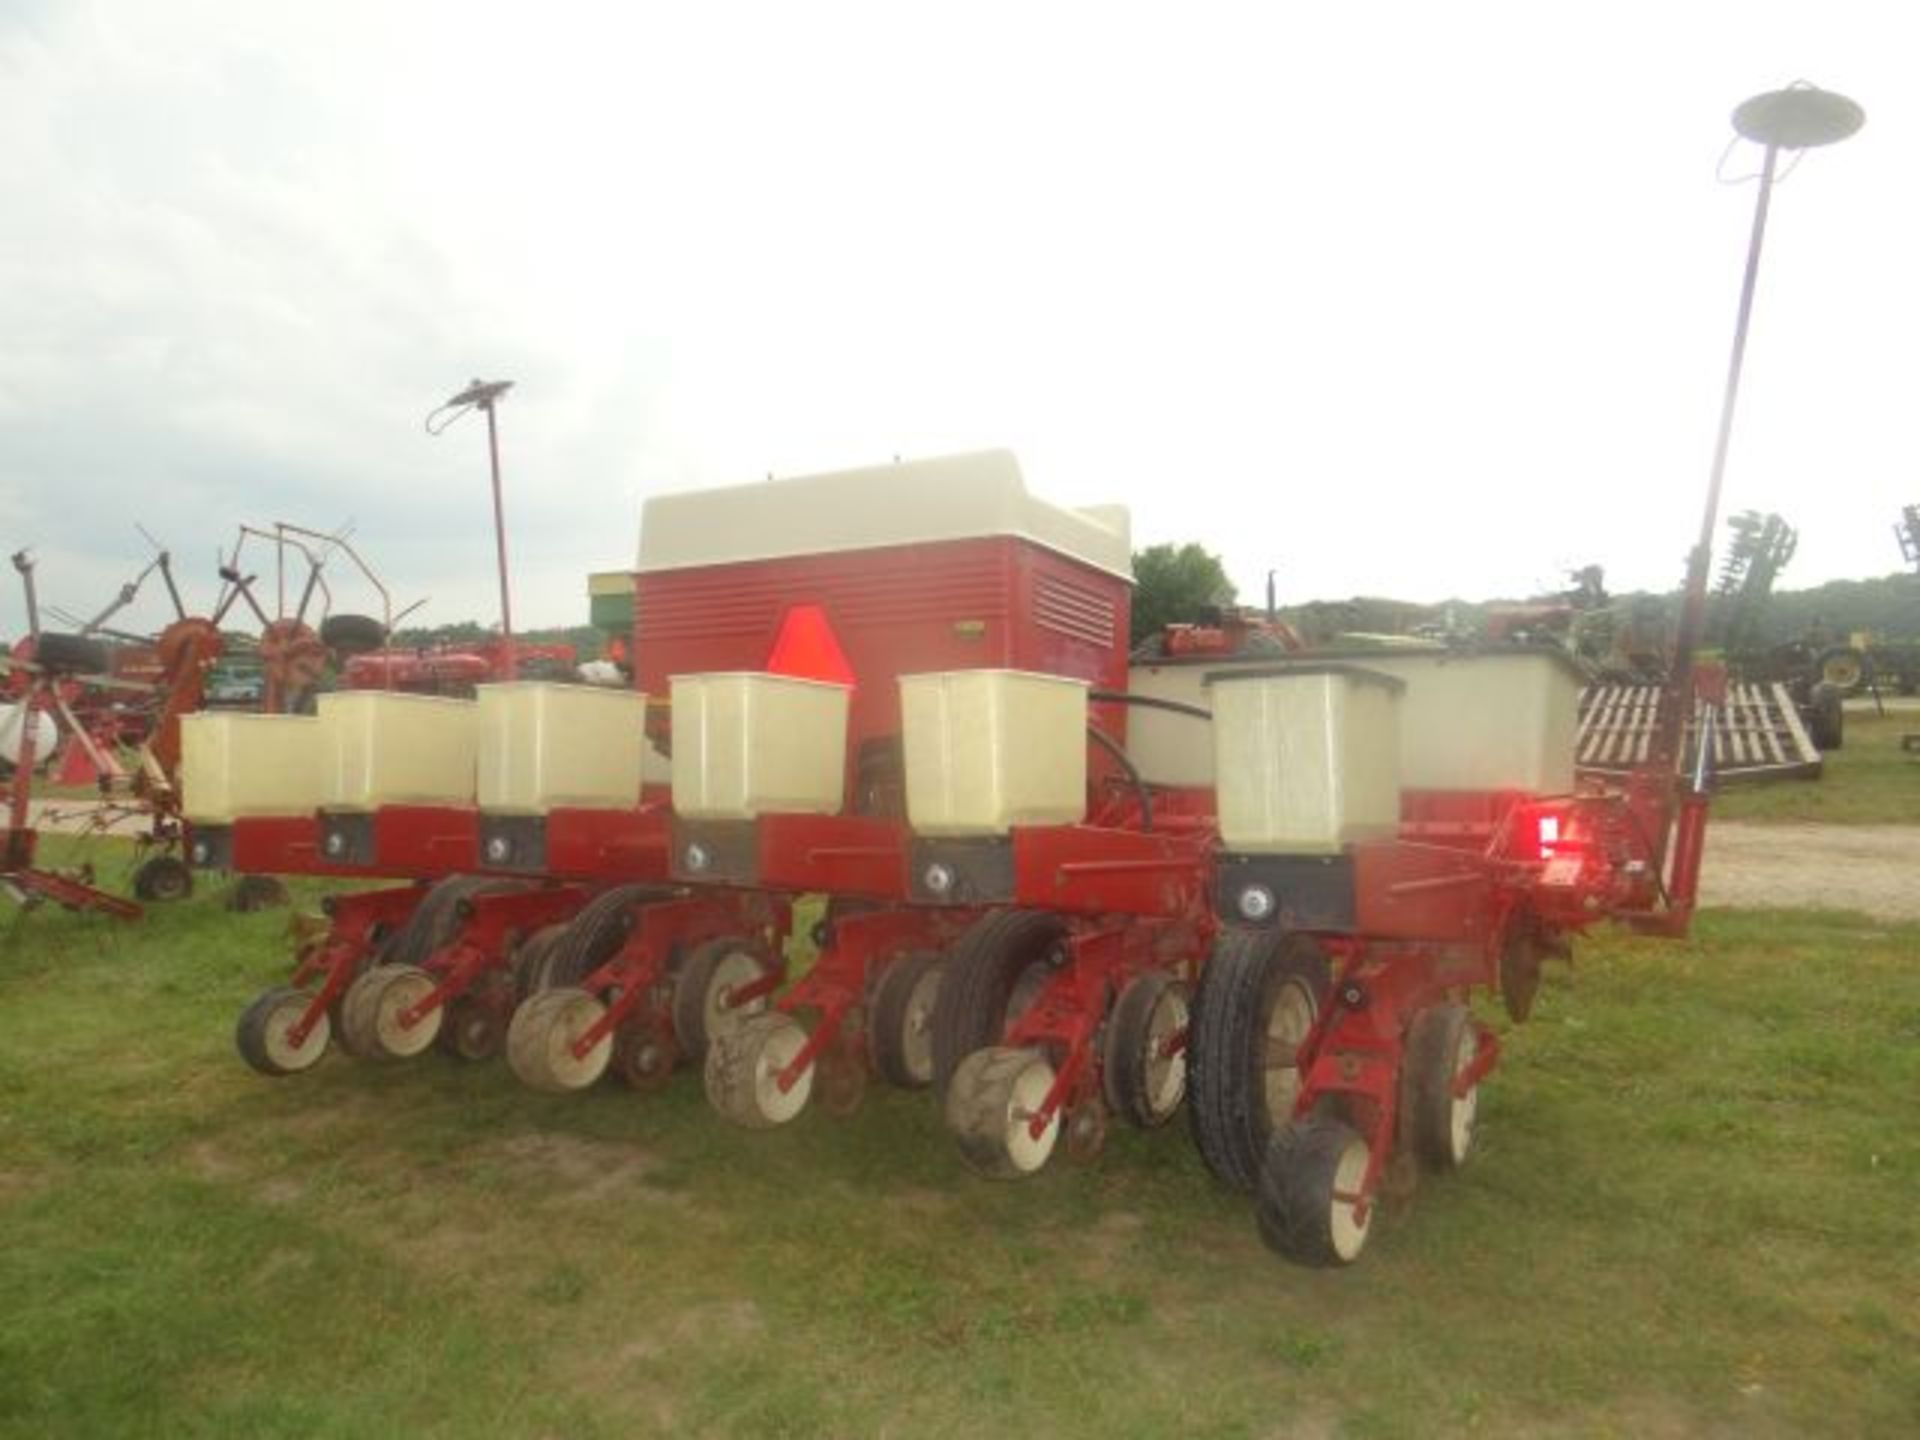 IH 800 Cyclo Planter 6 Row 30", Bean Drum Only, Monitor and Manuals in the Shed - Image 3 of 3